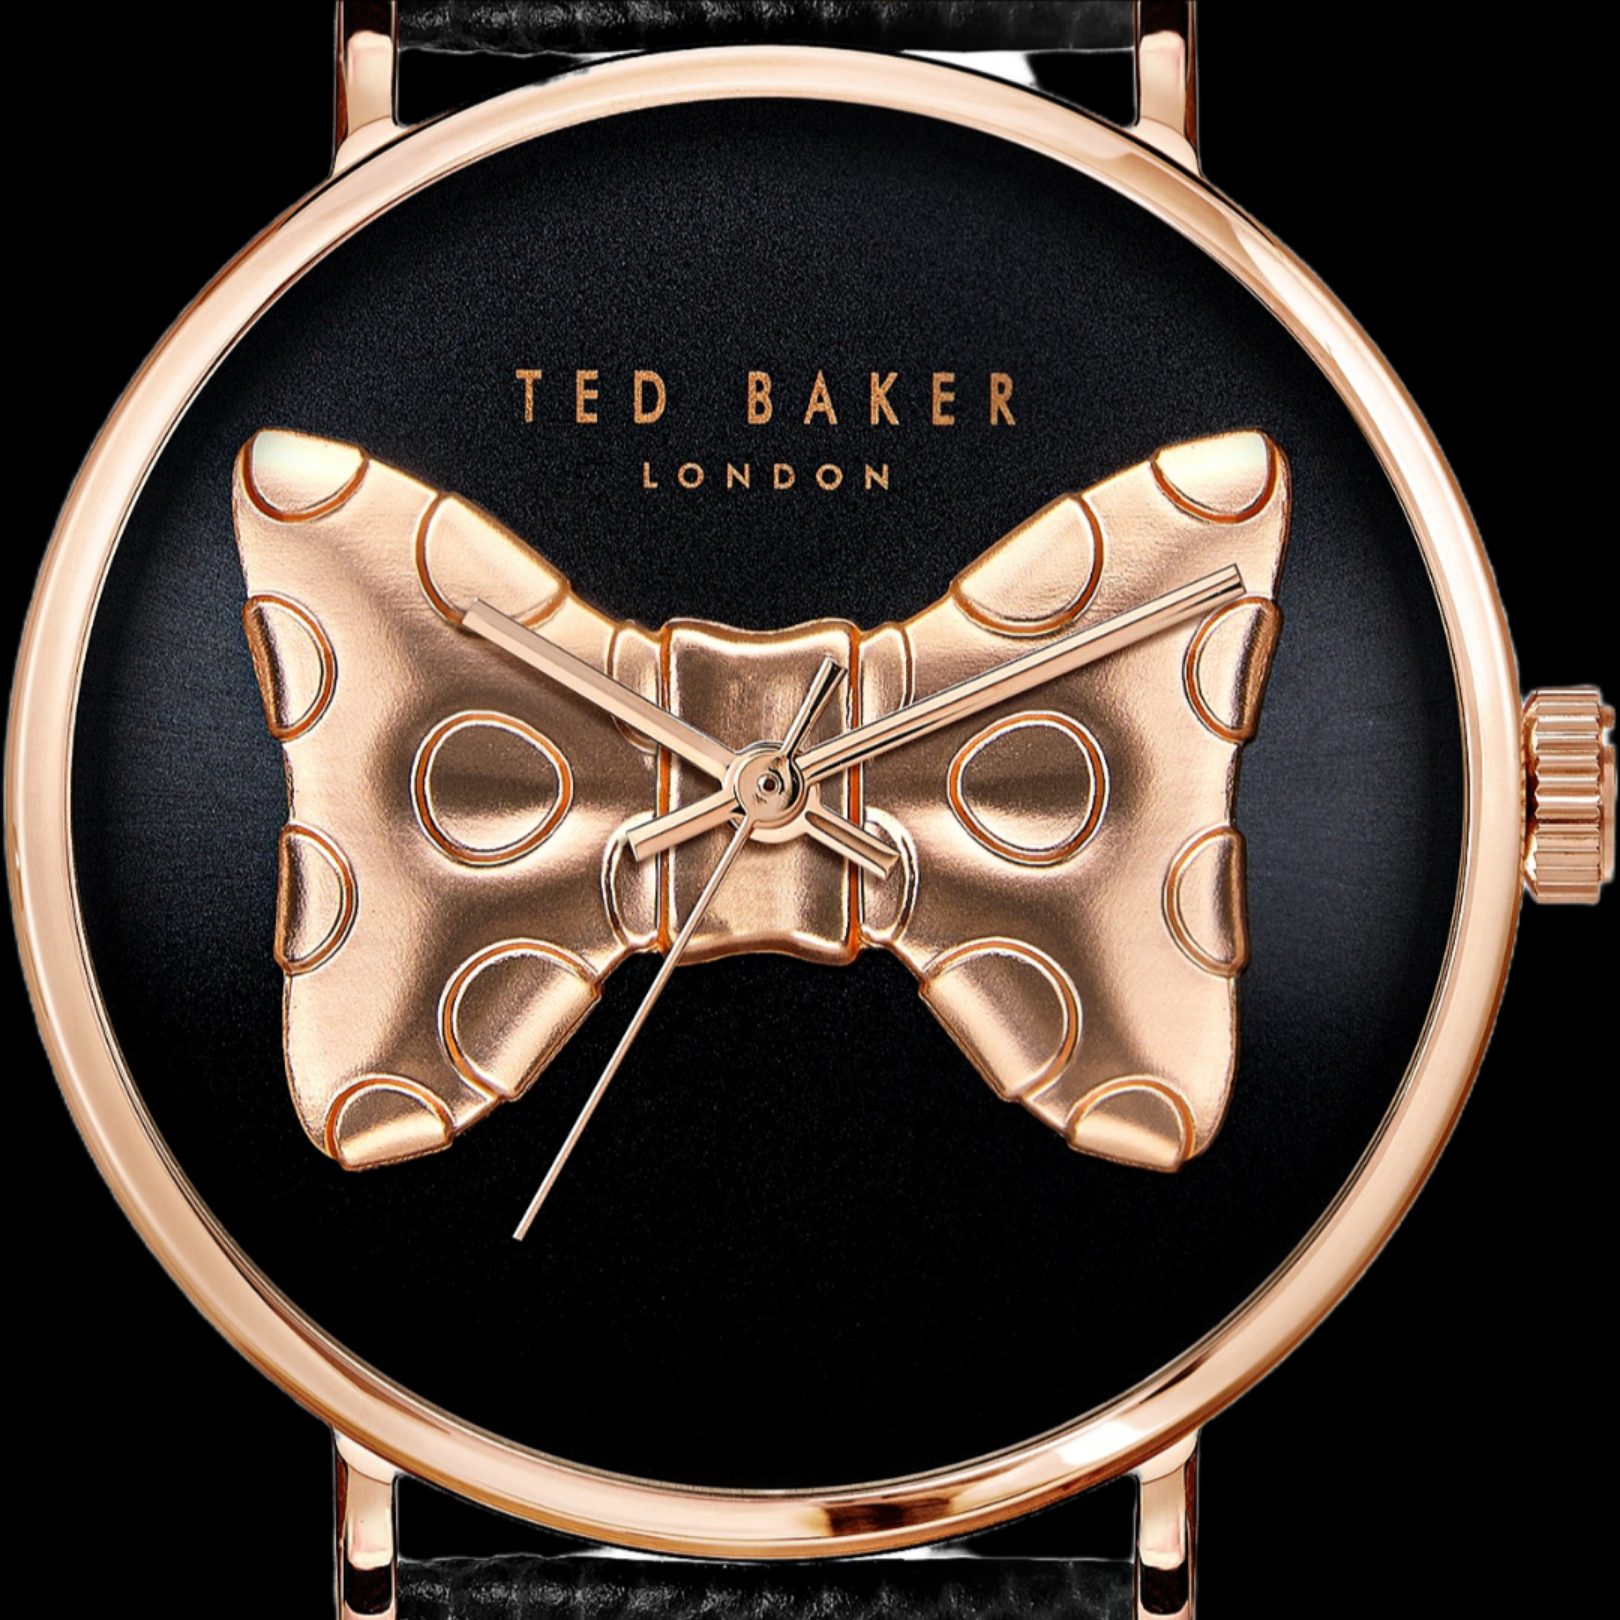 Ted Baker Watches via 360 MAGAZINE.